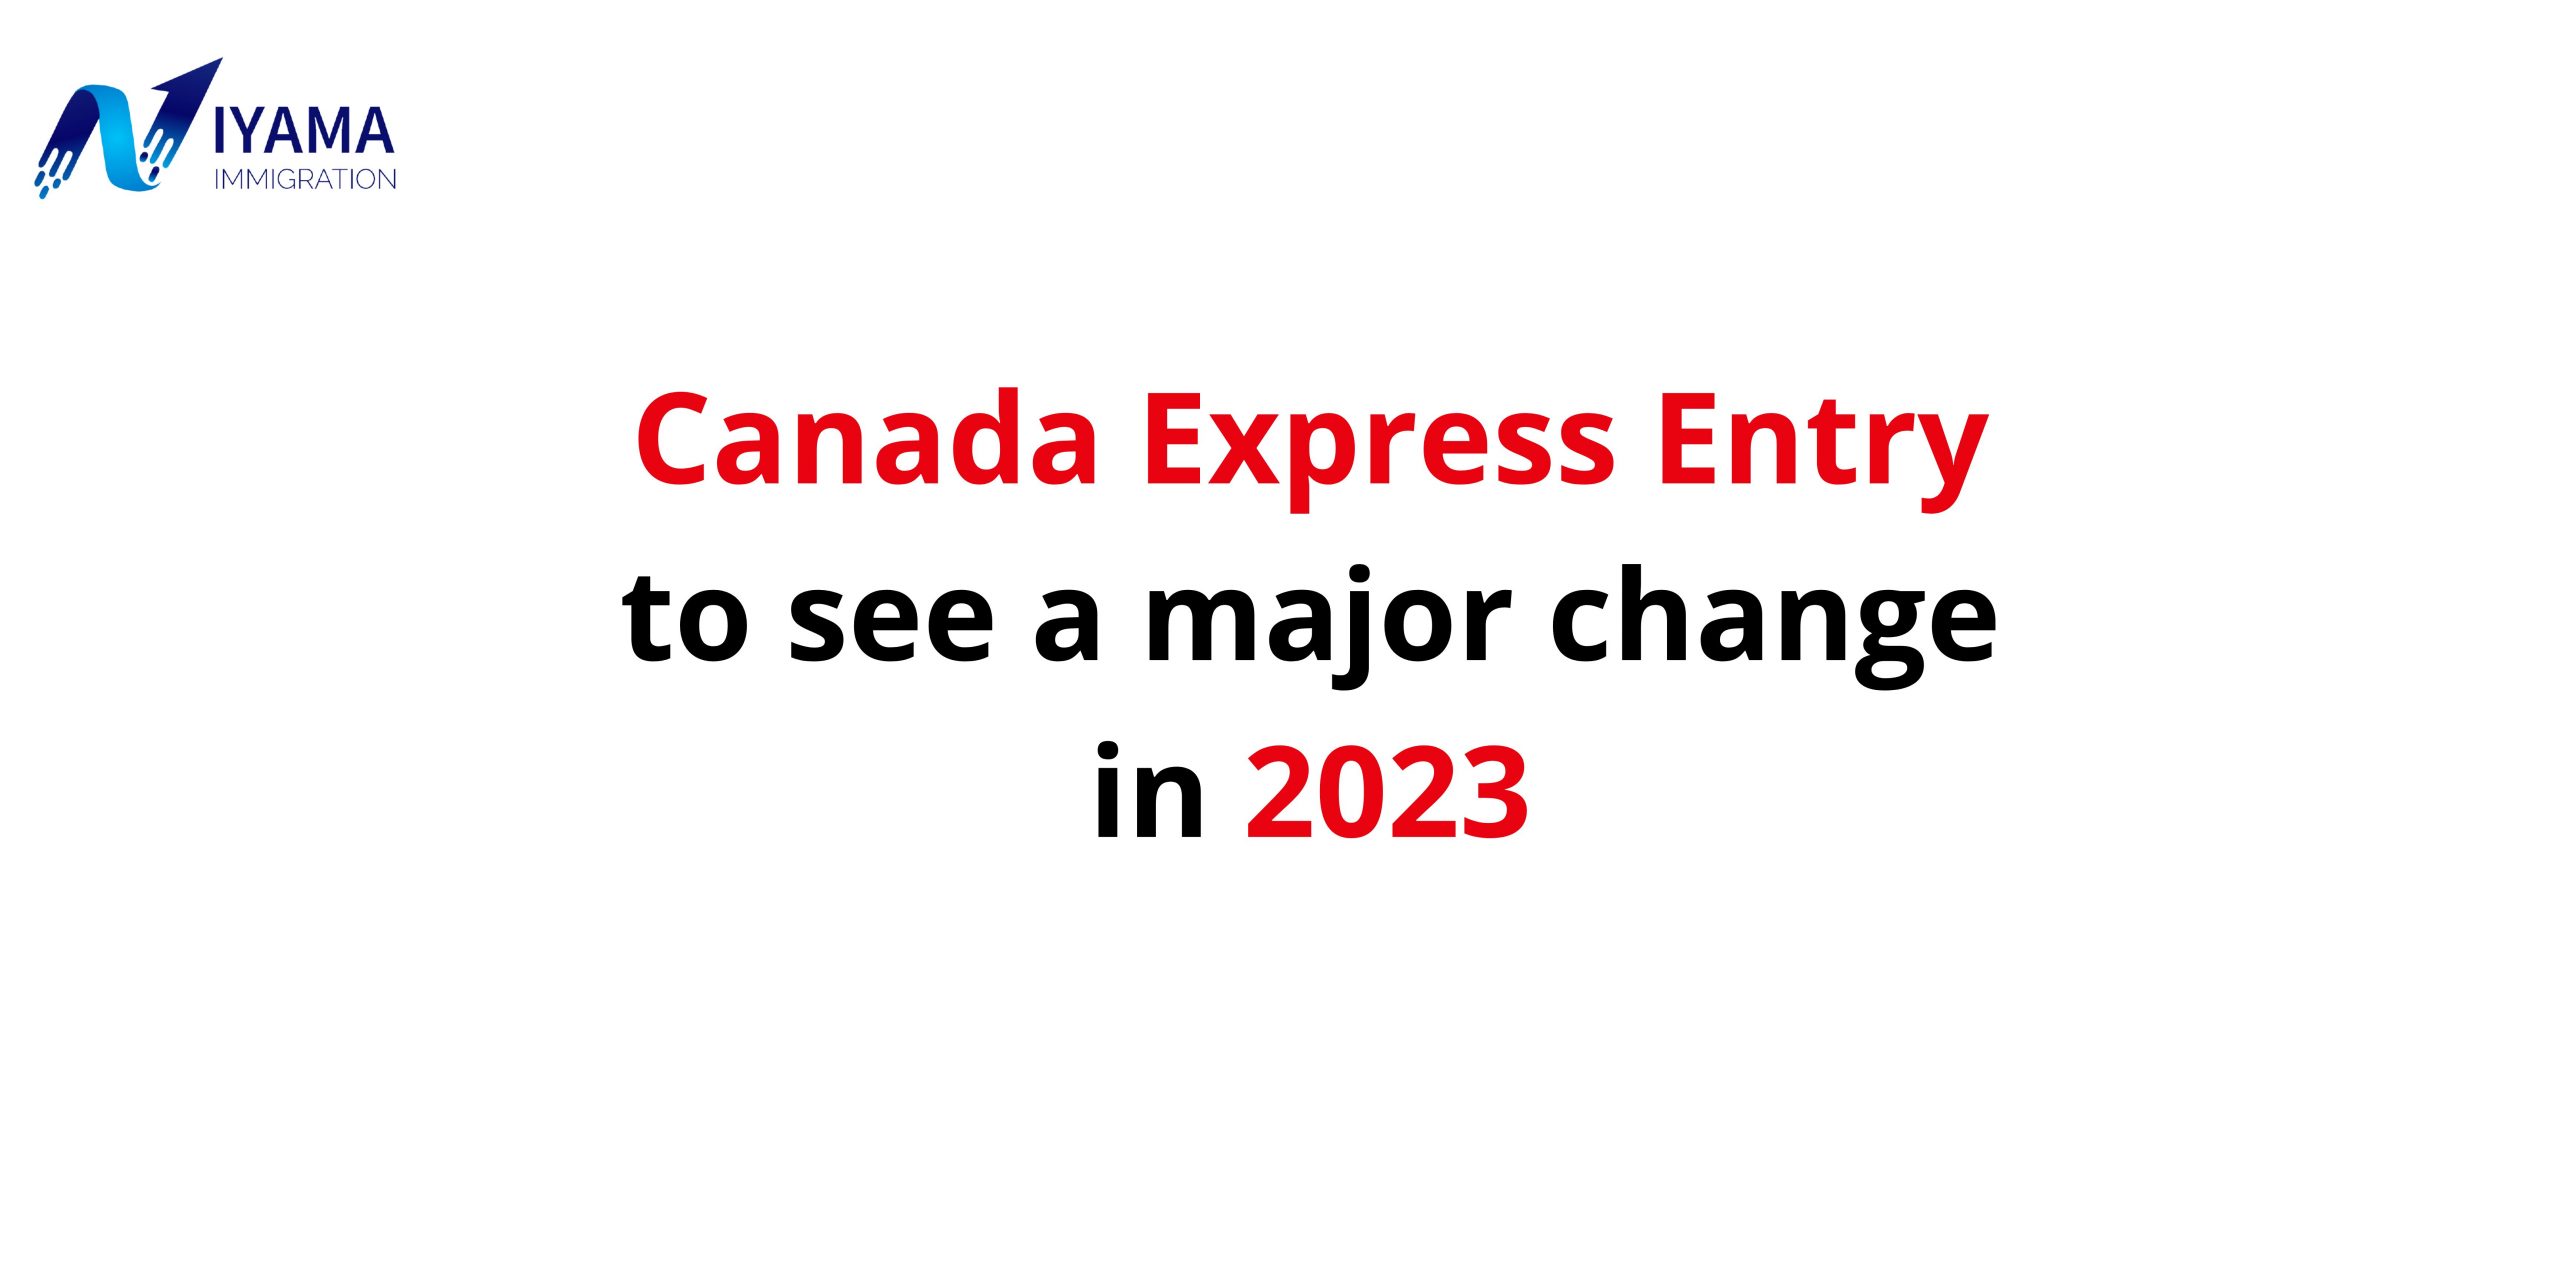 How Will Canada's Express Entry Change in 2023?